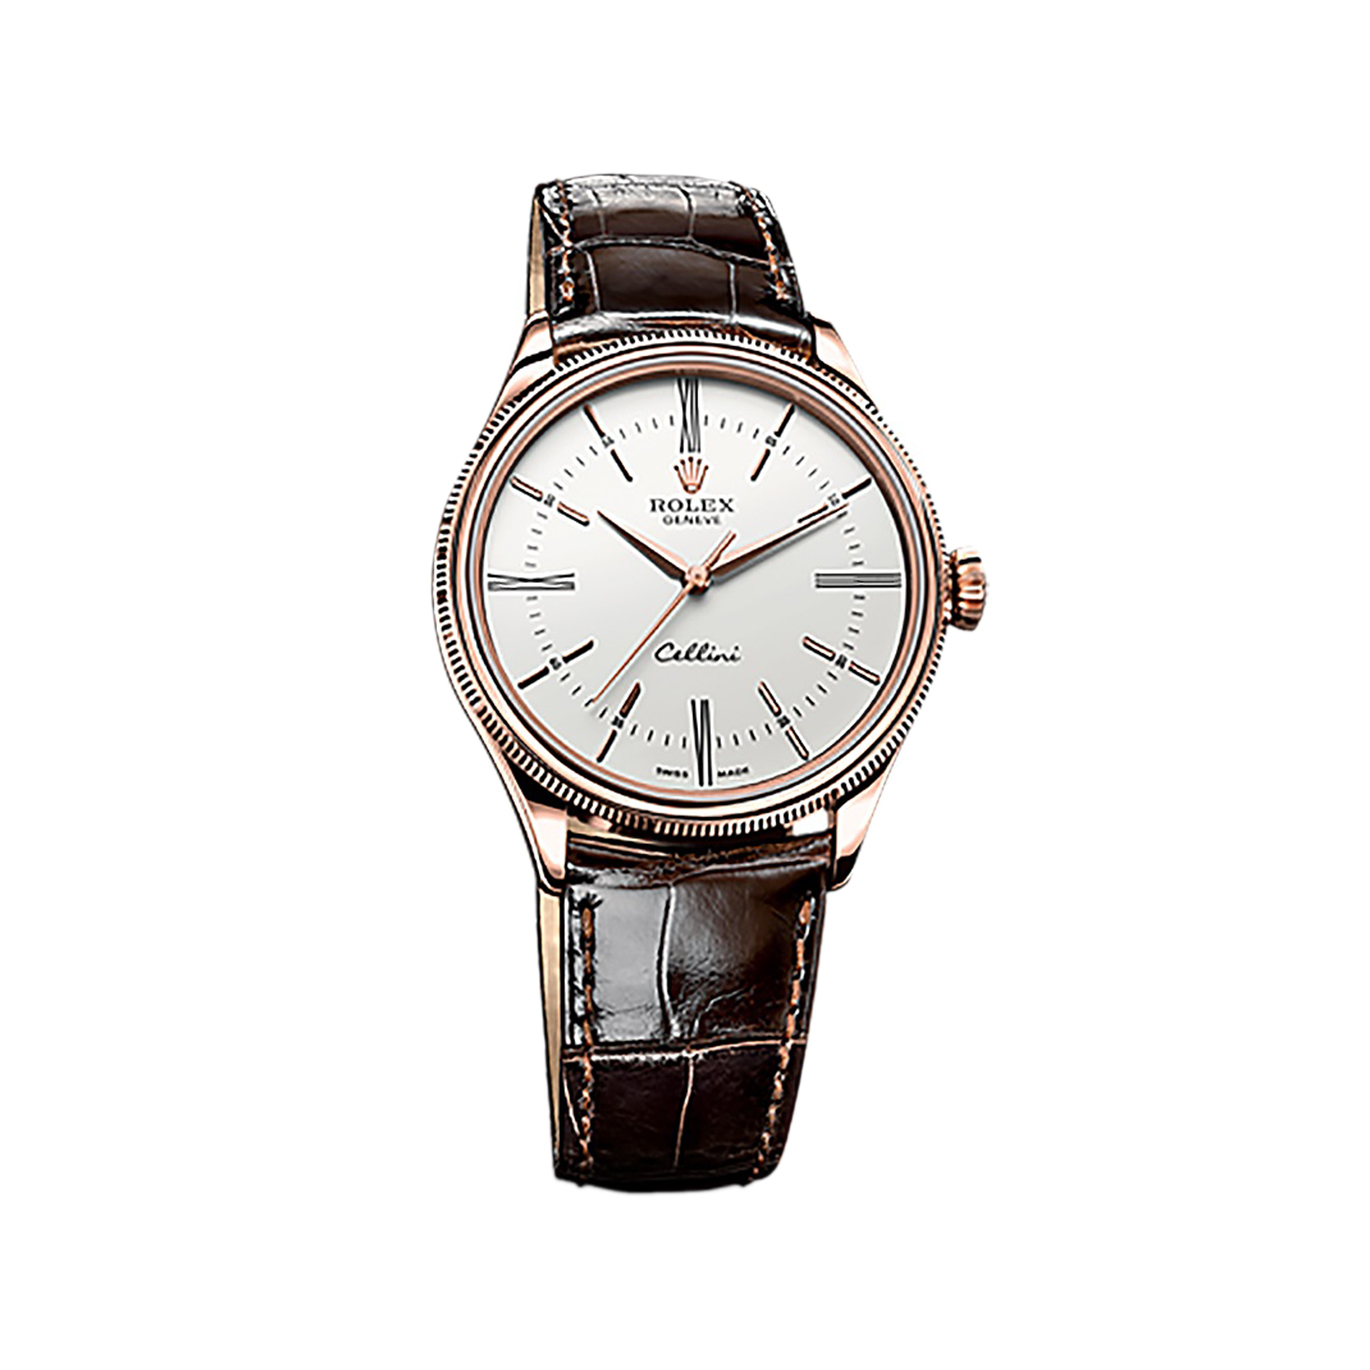 Cellini Time 50505 Rose Gold Watch (White)